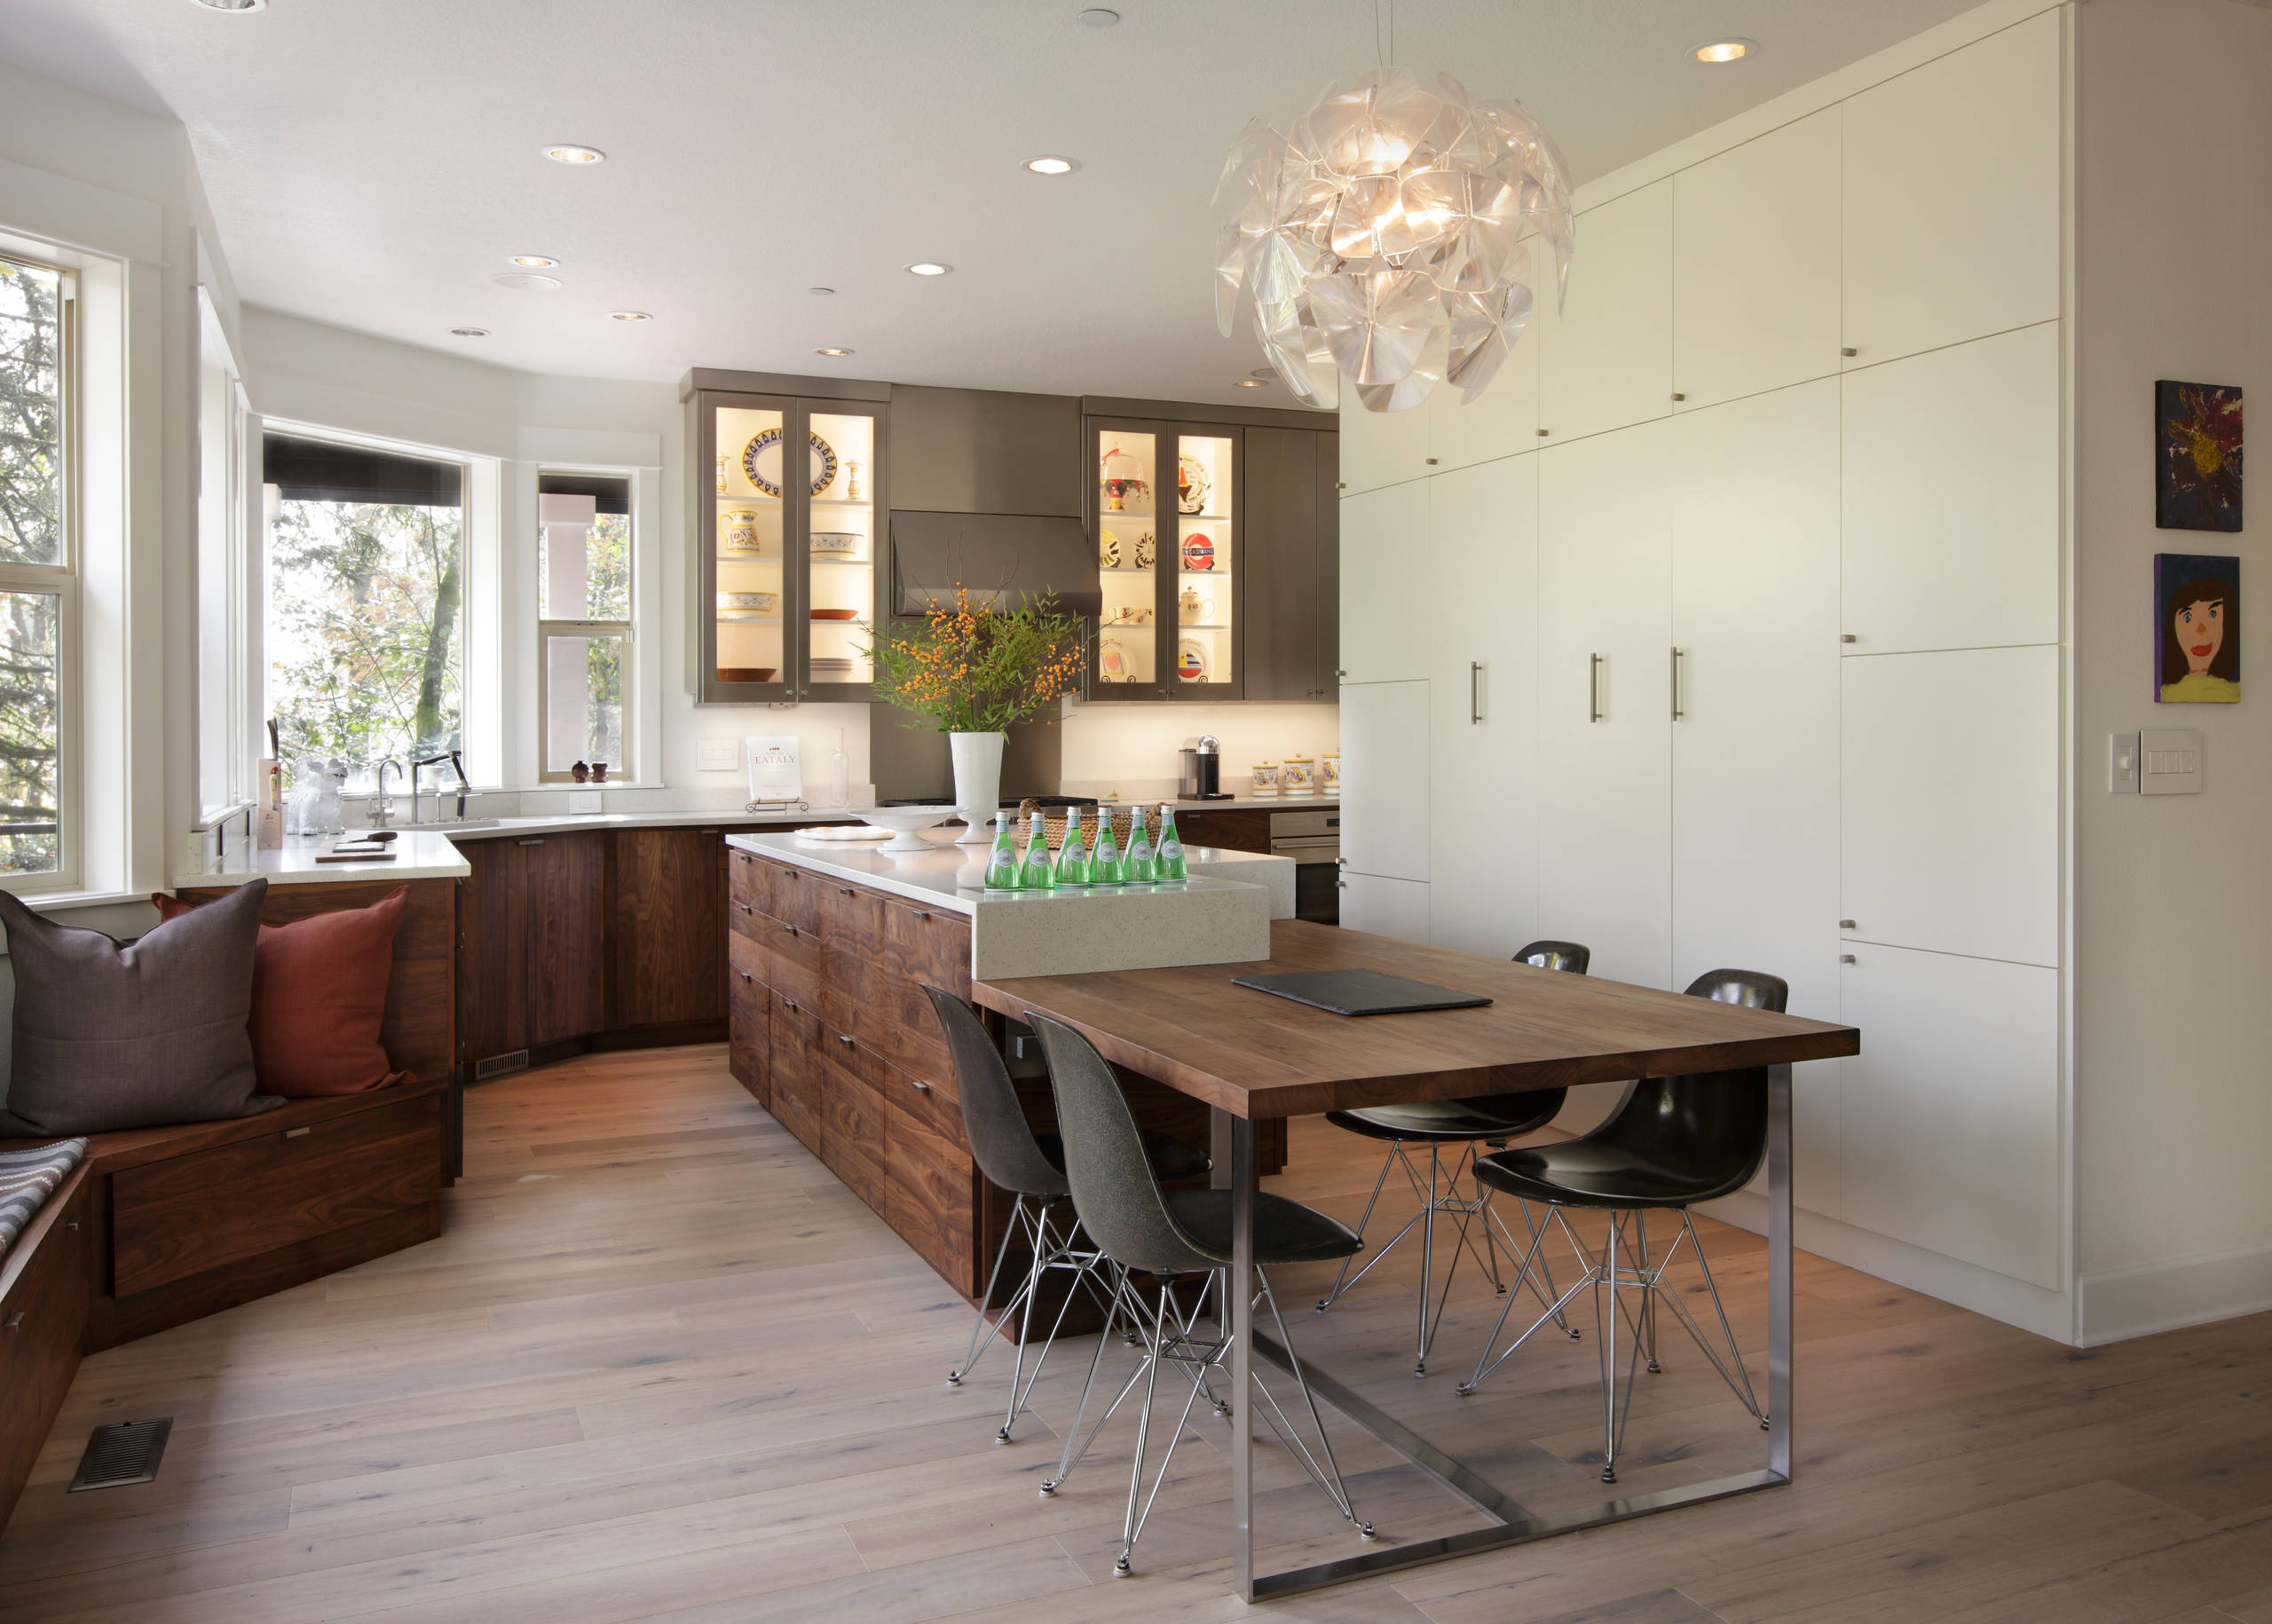 Table Attached To Island - Photos & Ideas | Houzz